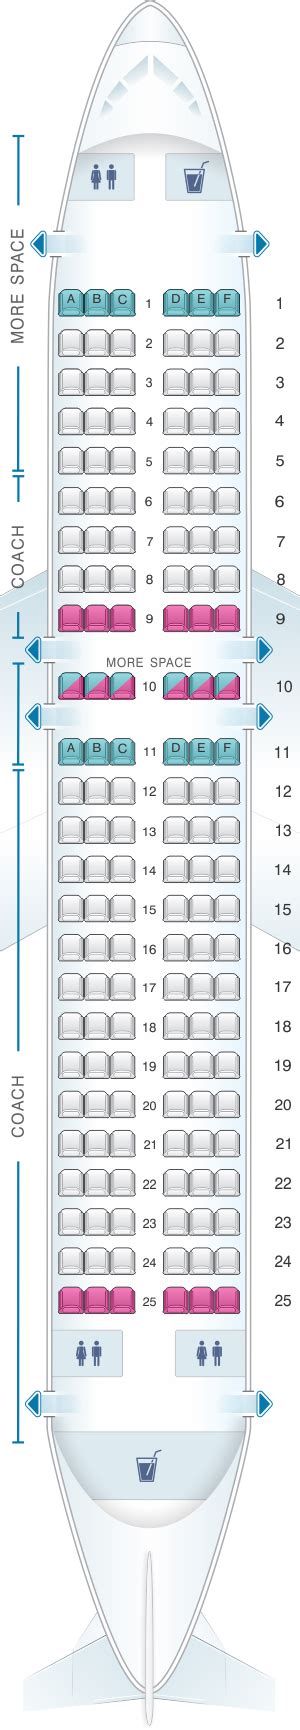 Seat Map Jetblue Airways Airbus A320 Asiana Airlines Air Transat